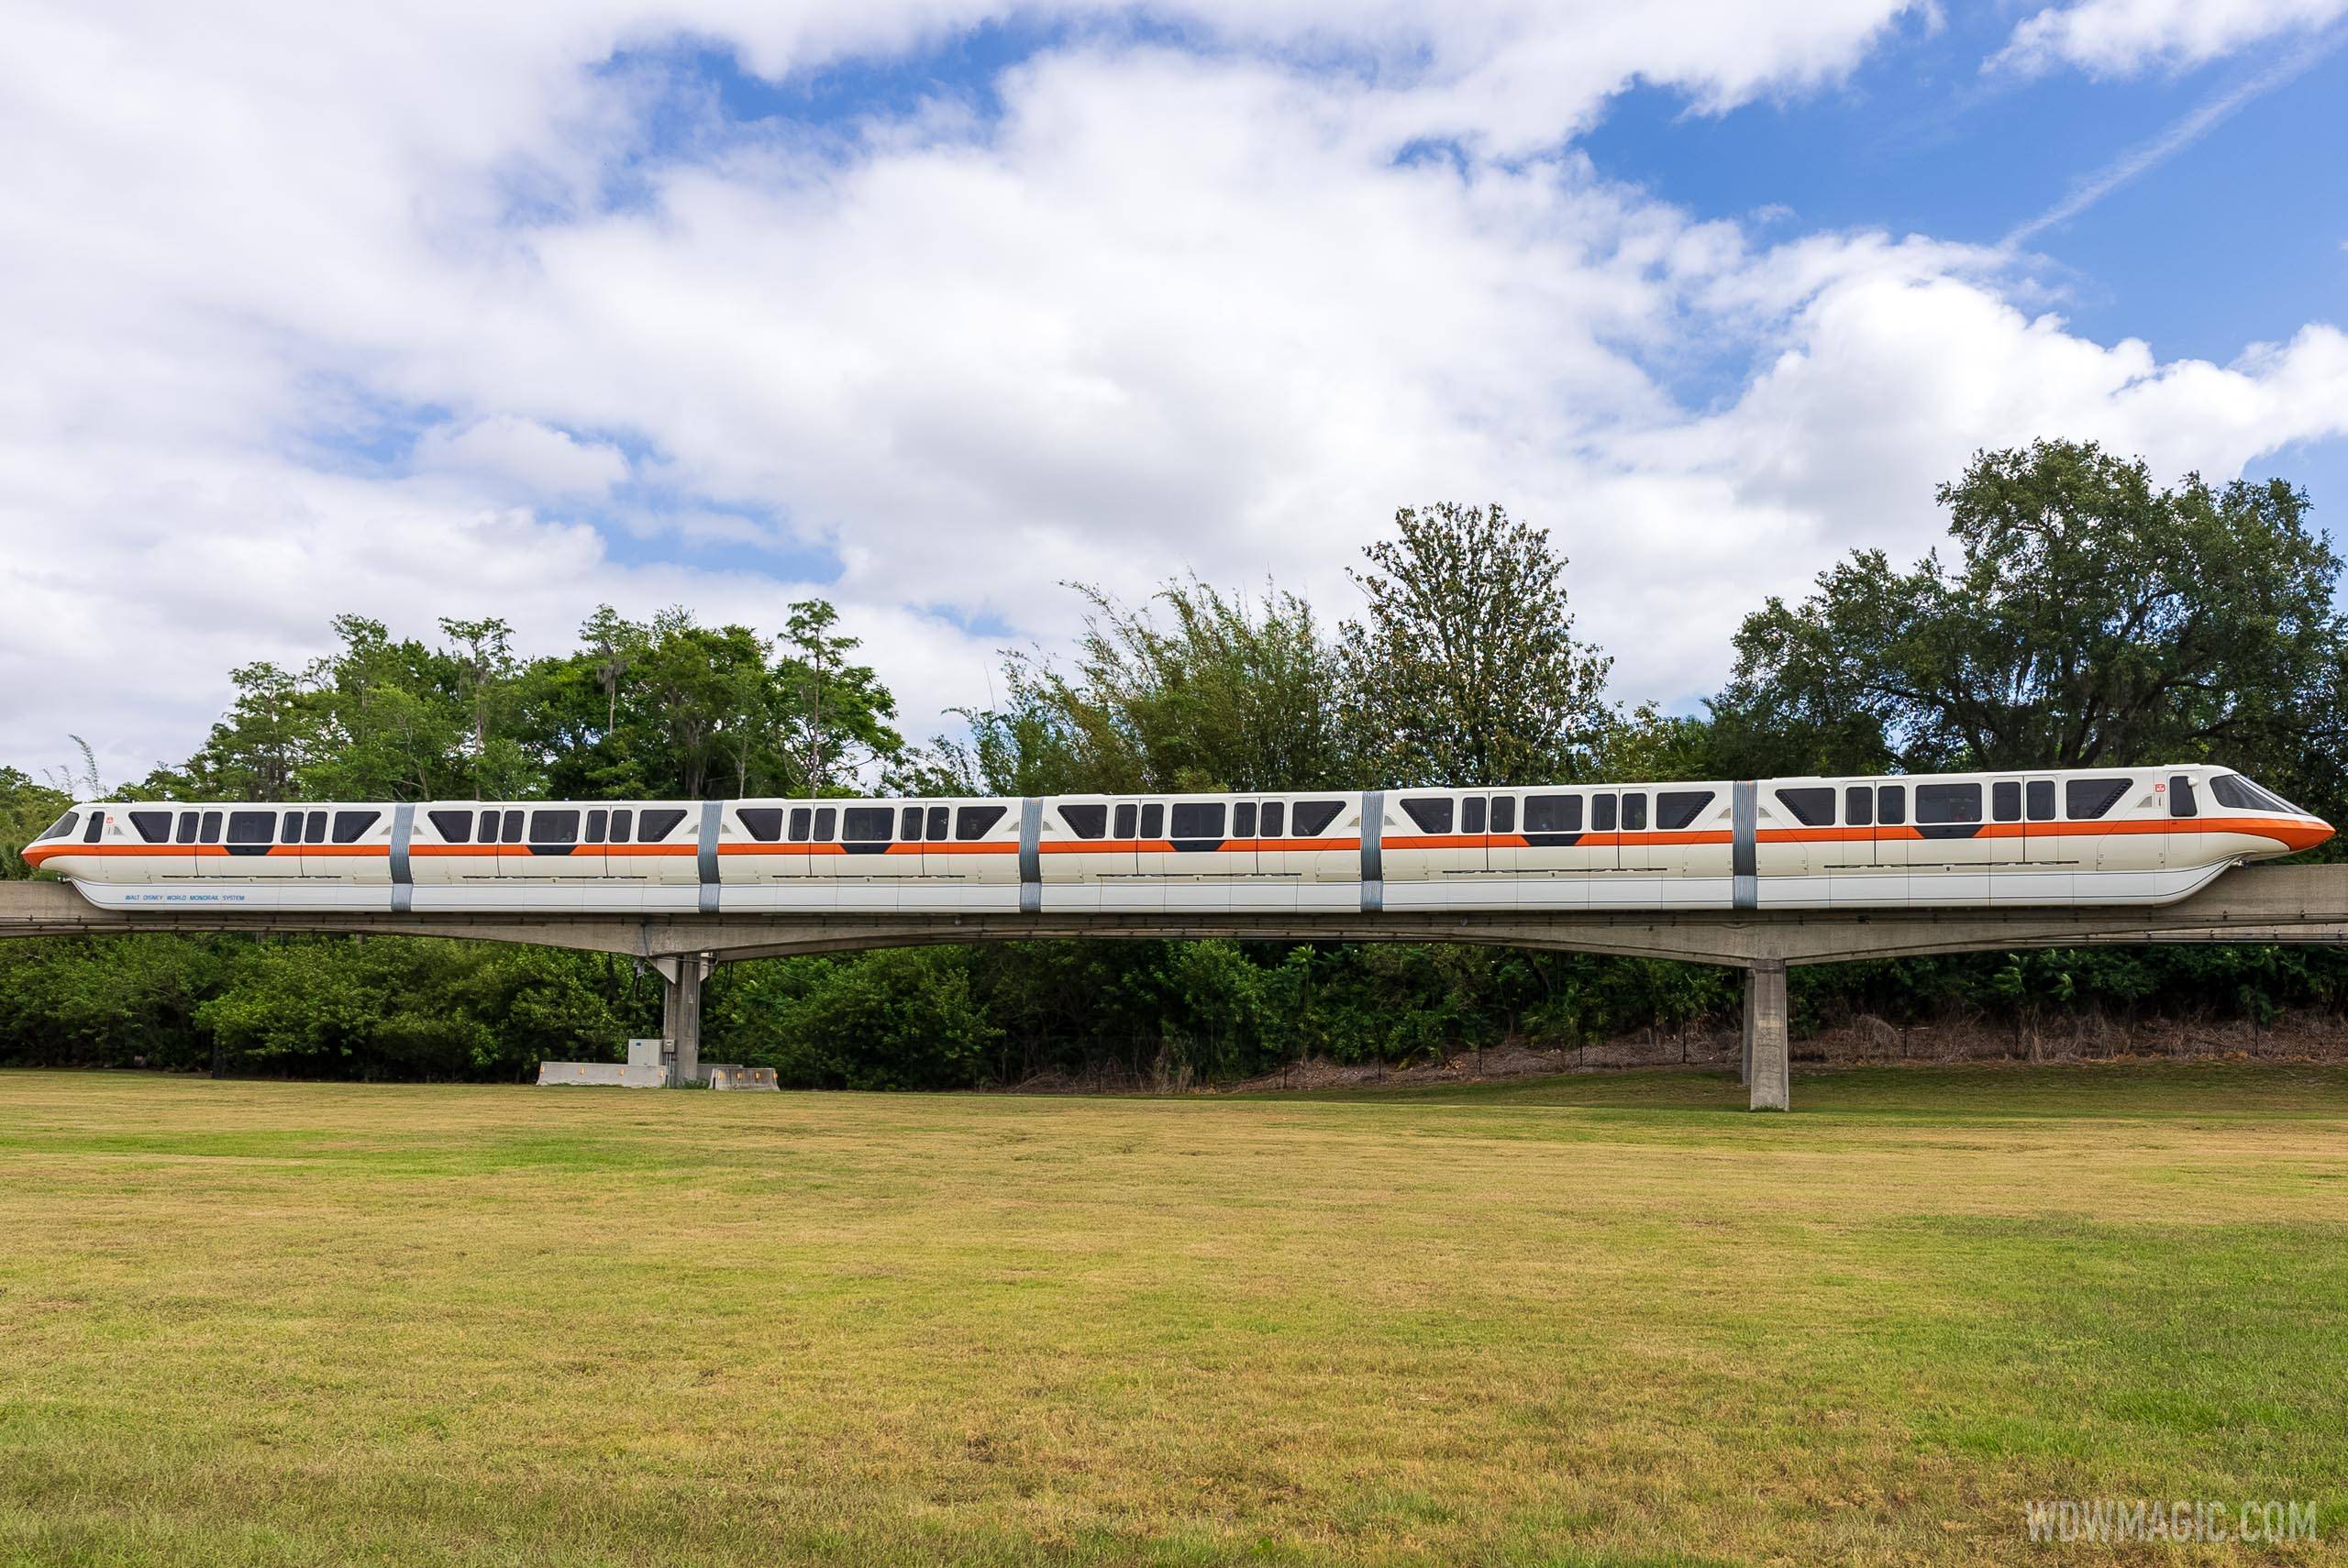 Monorail Orange on the approach into the Magic Kingdom station